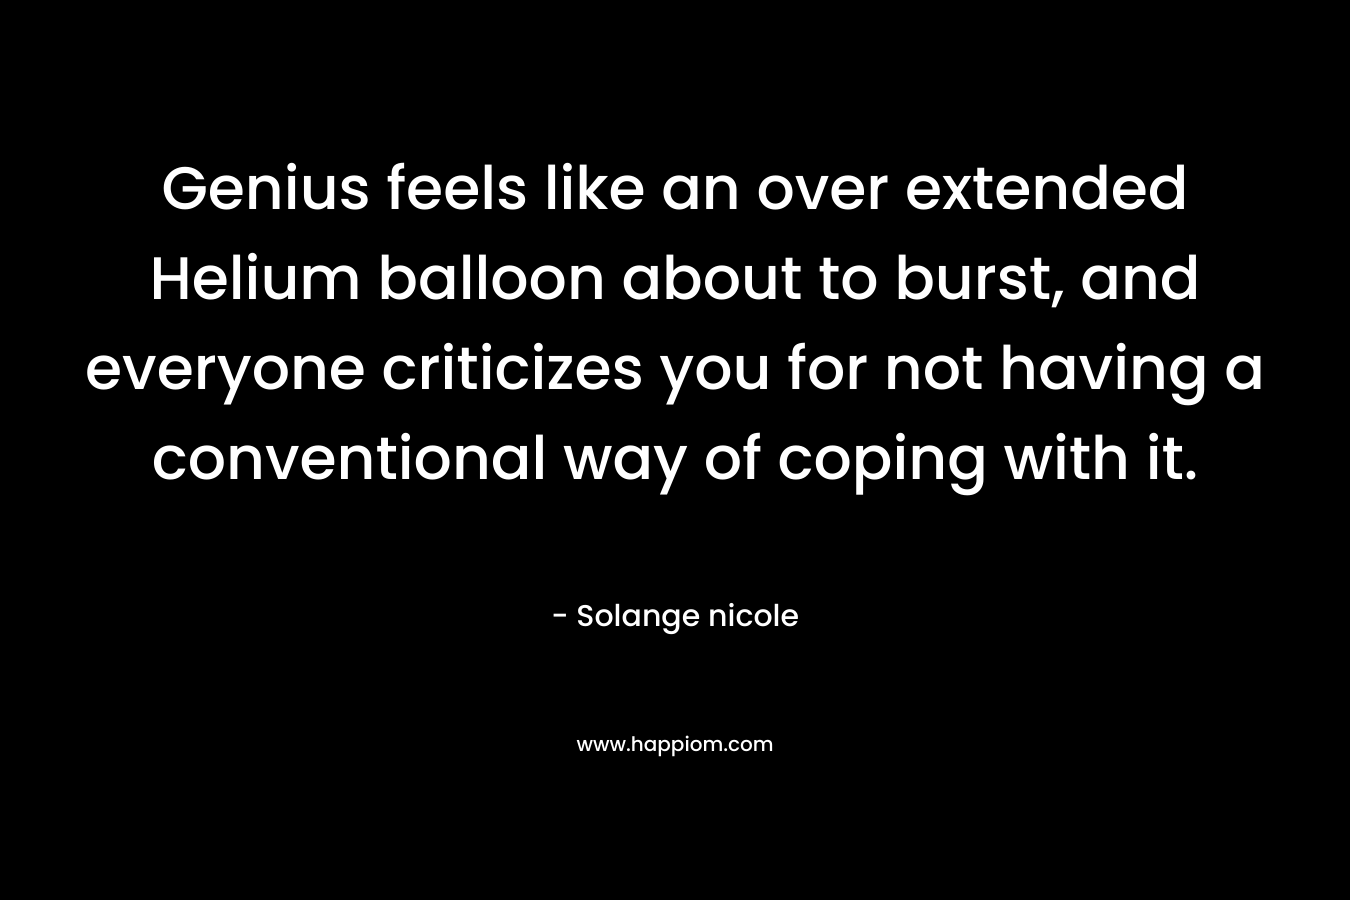 Genius feels like an over extended Helium balloon about to burst, and everyone criticizes you for not having a conventional way of coping with it. – Solange nicole